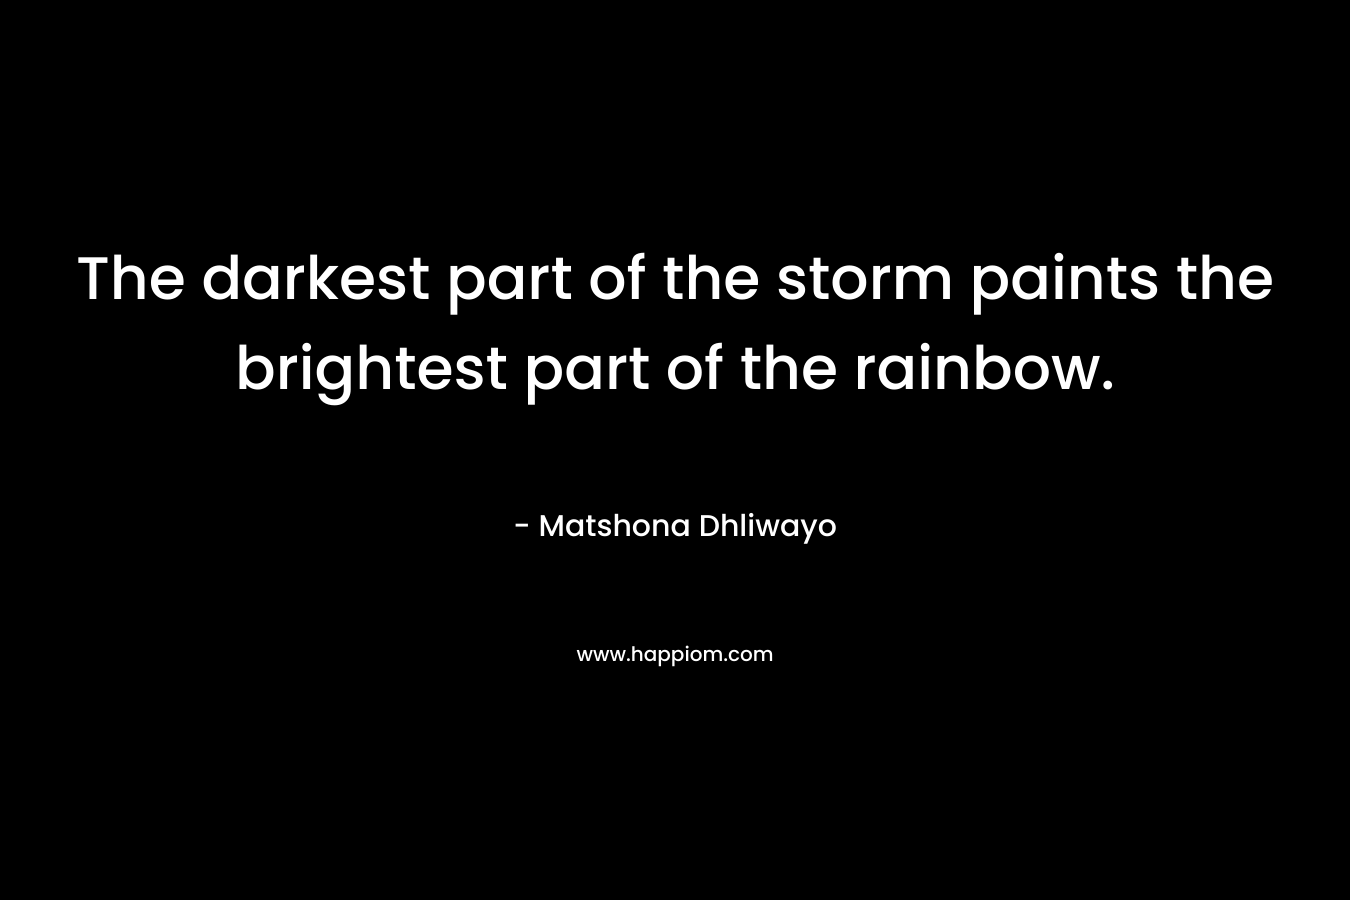 The darkest part of the storm paints the brightest part of the rainbow.